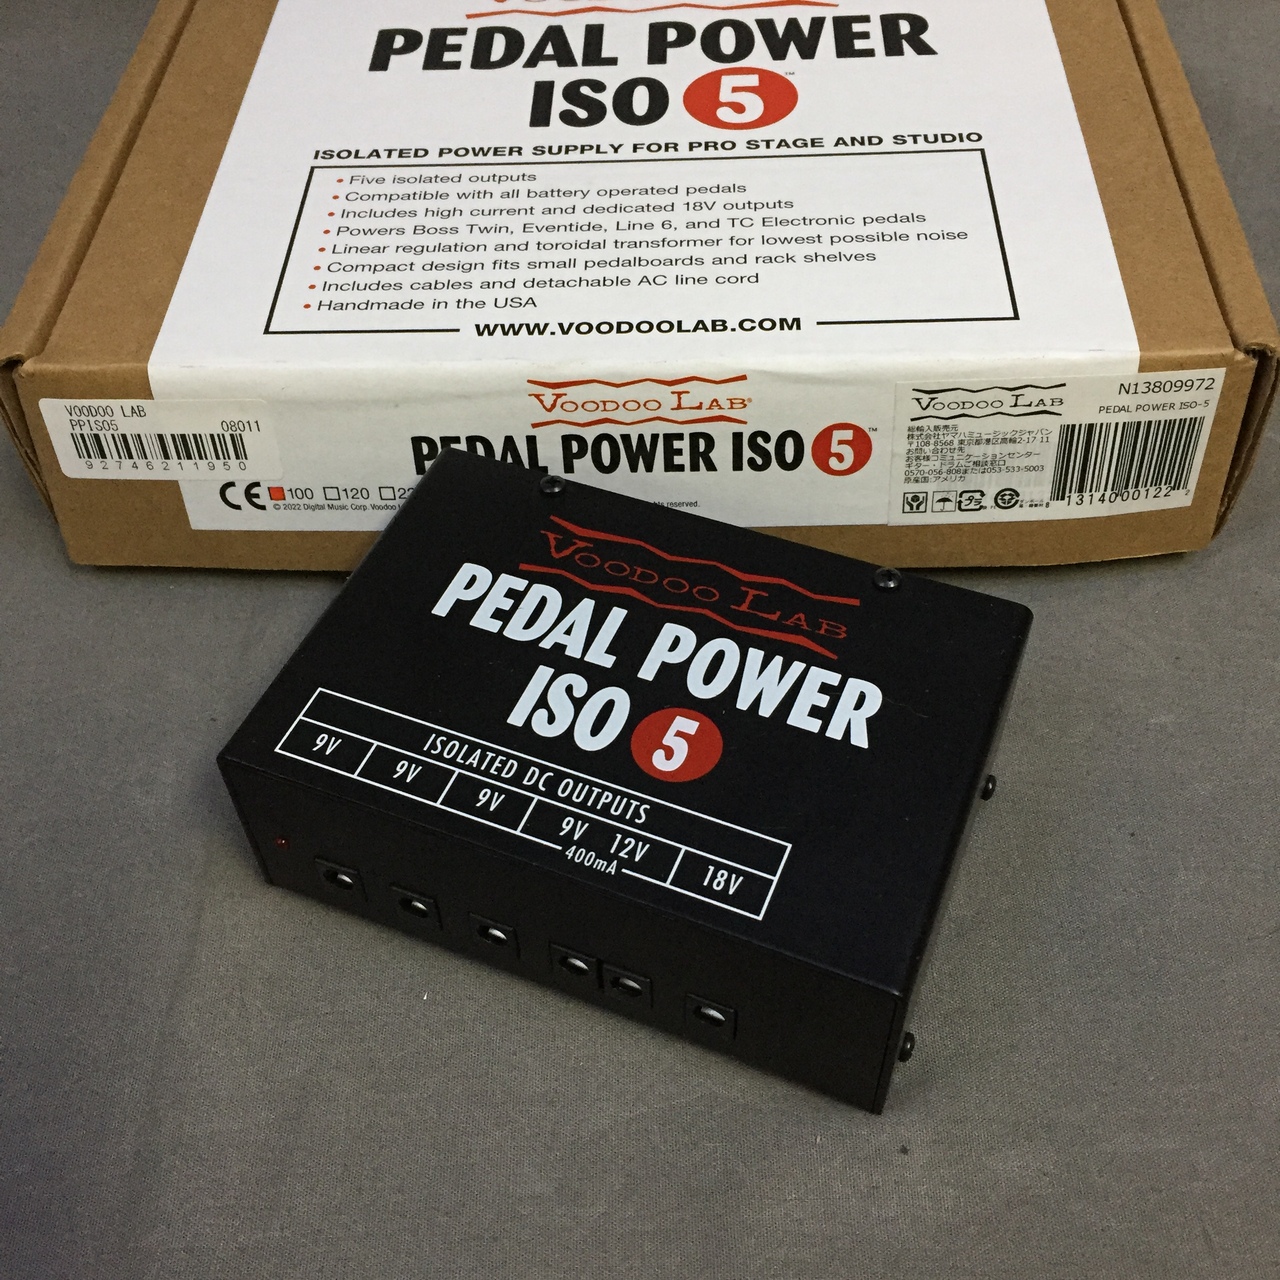 voodoo lab pedal power ISO 5